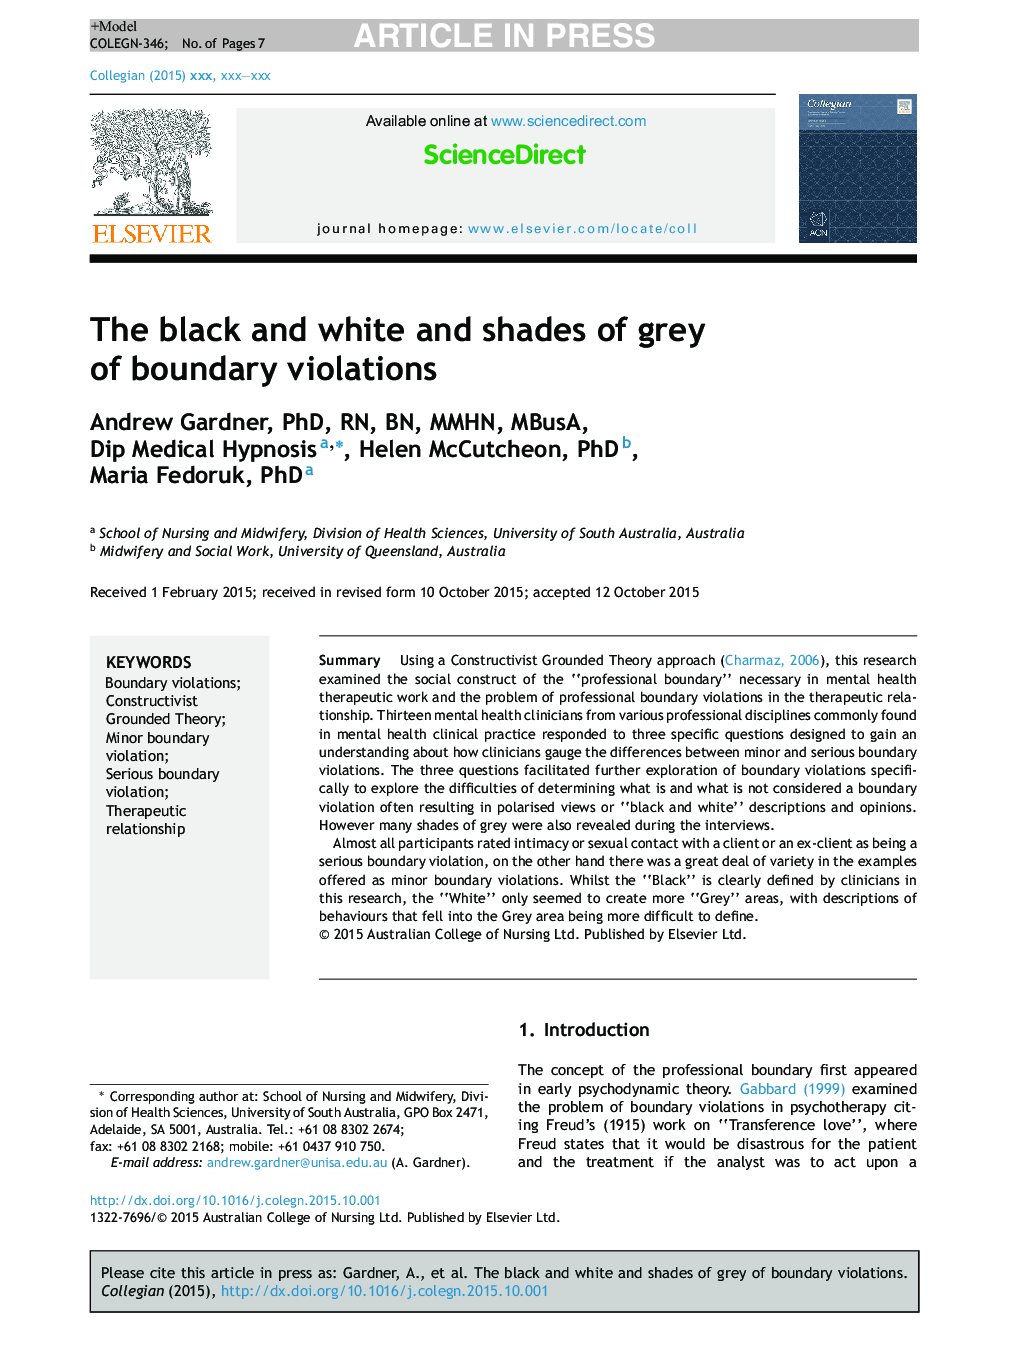 The black and white and shades of grey of boundary violations